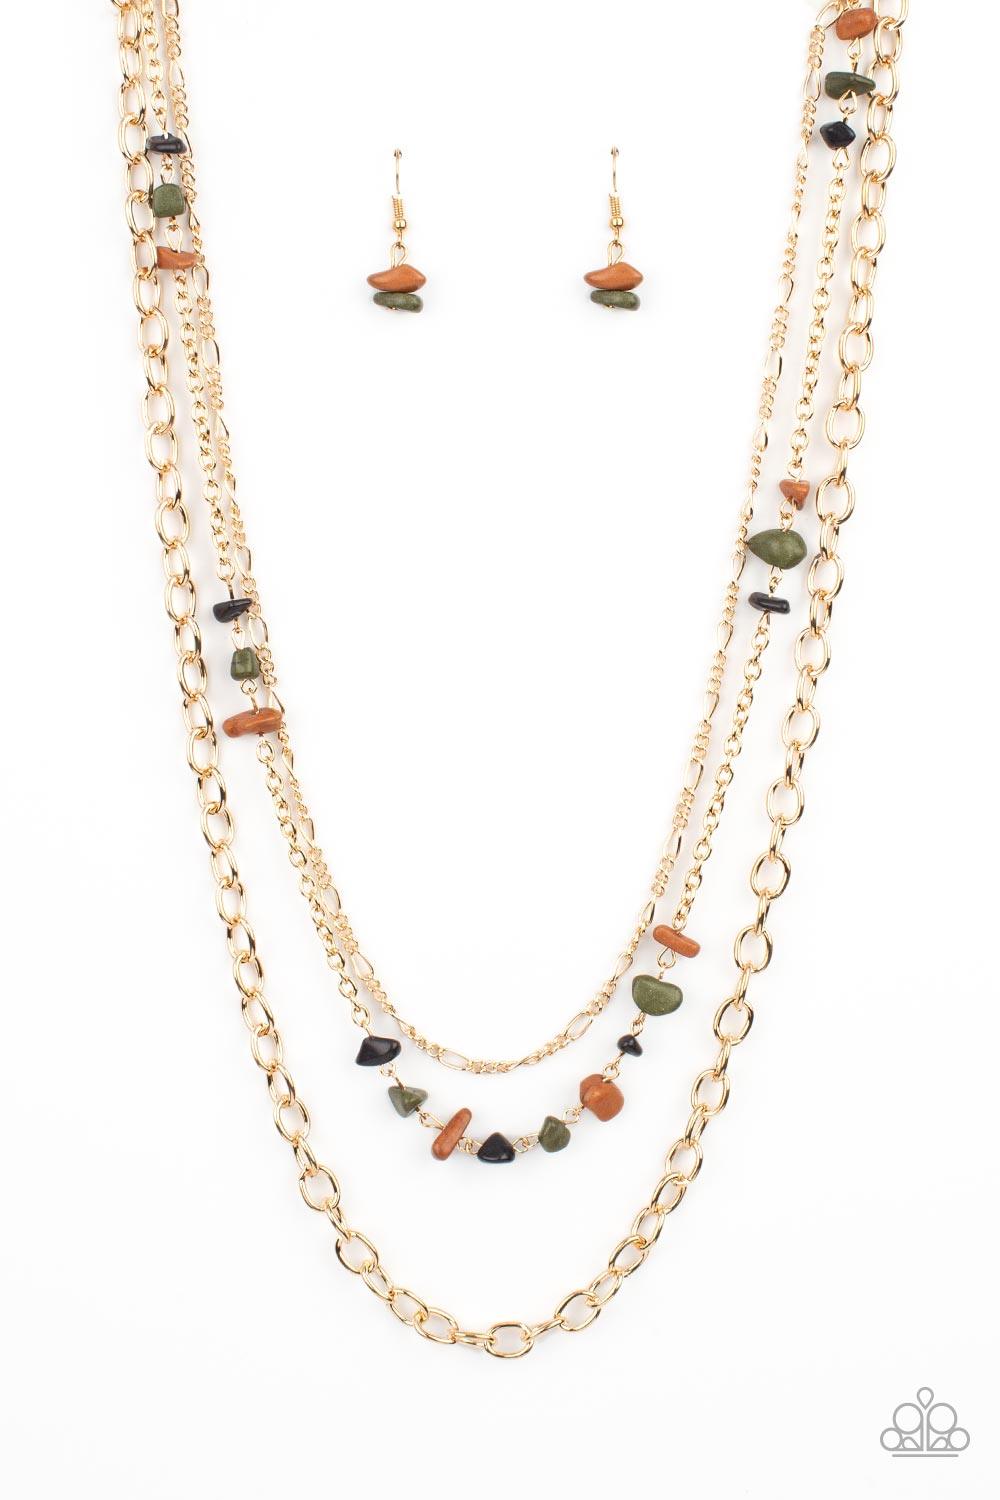 Paparazzi Accessories Artisanal Abundance - Multi Infused with sections of earthy brown, black, and green stones, a trio of mismatched gold chains layer down the chest for a dash of rustic refinement. Features an adjustable clasp closure. Sold as one indi